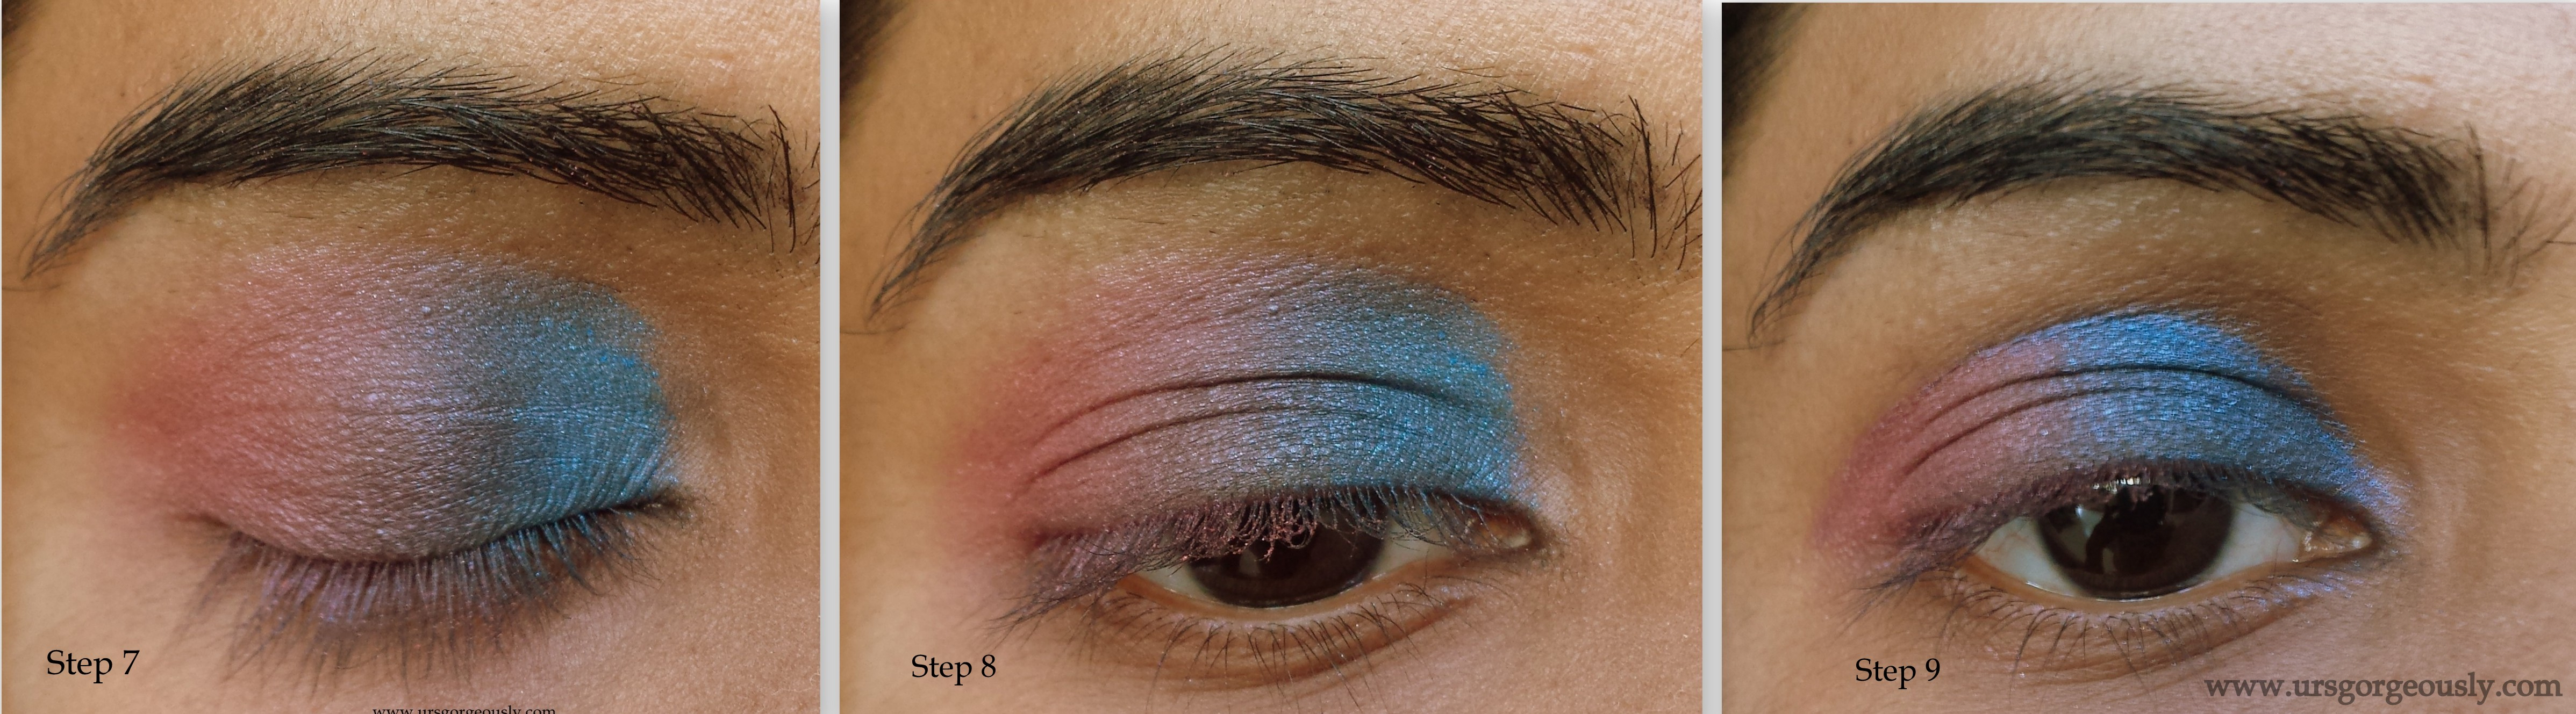 Simple Pink Eye Makeup Simple Blue And Pink Eye Makeup Tutorial With Mua Pro Immaculate